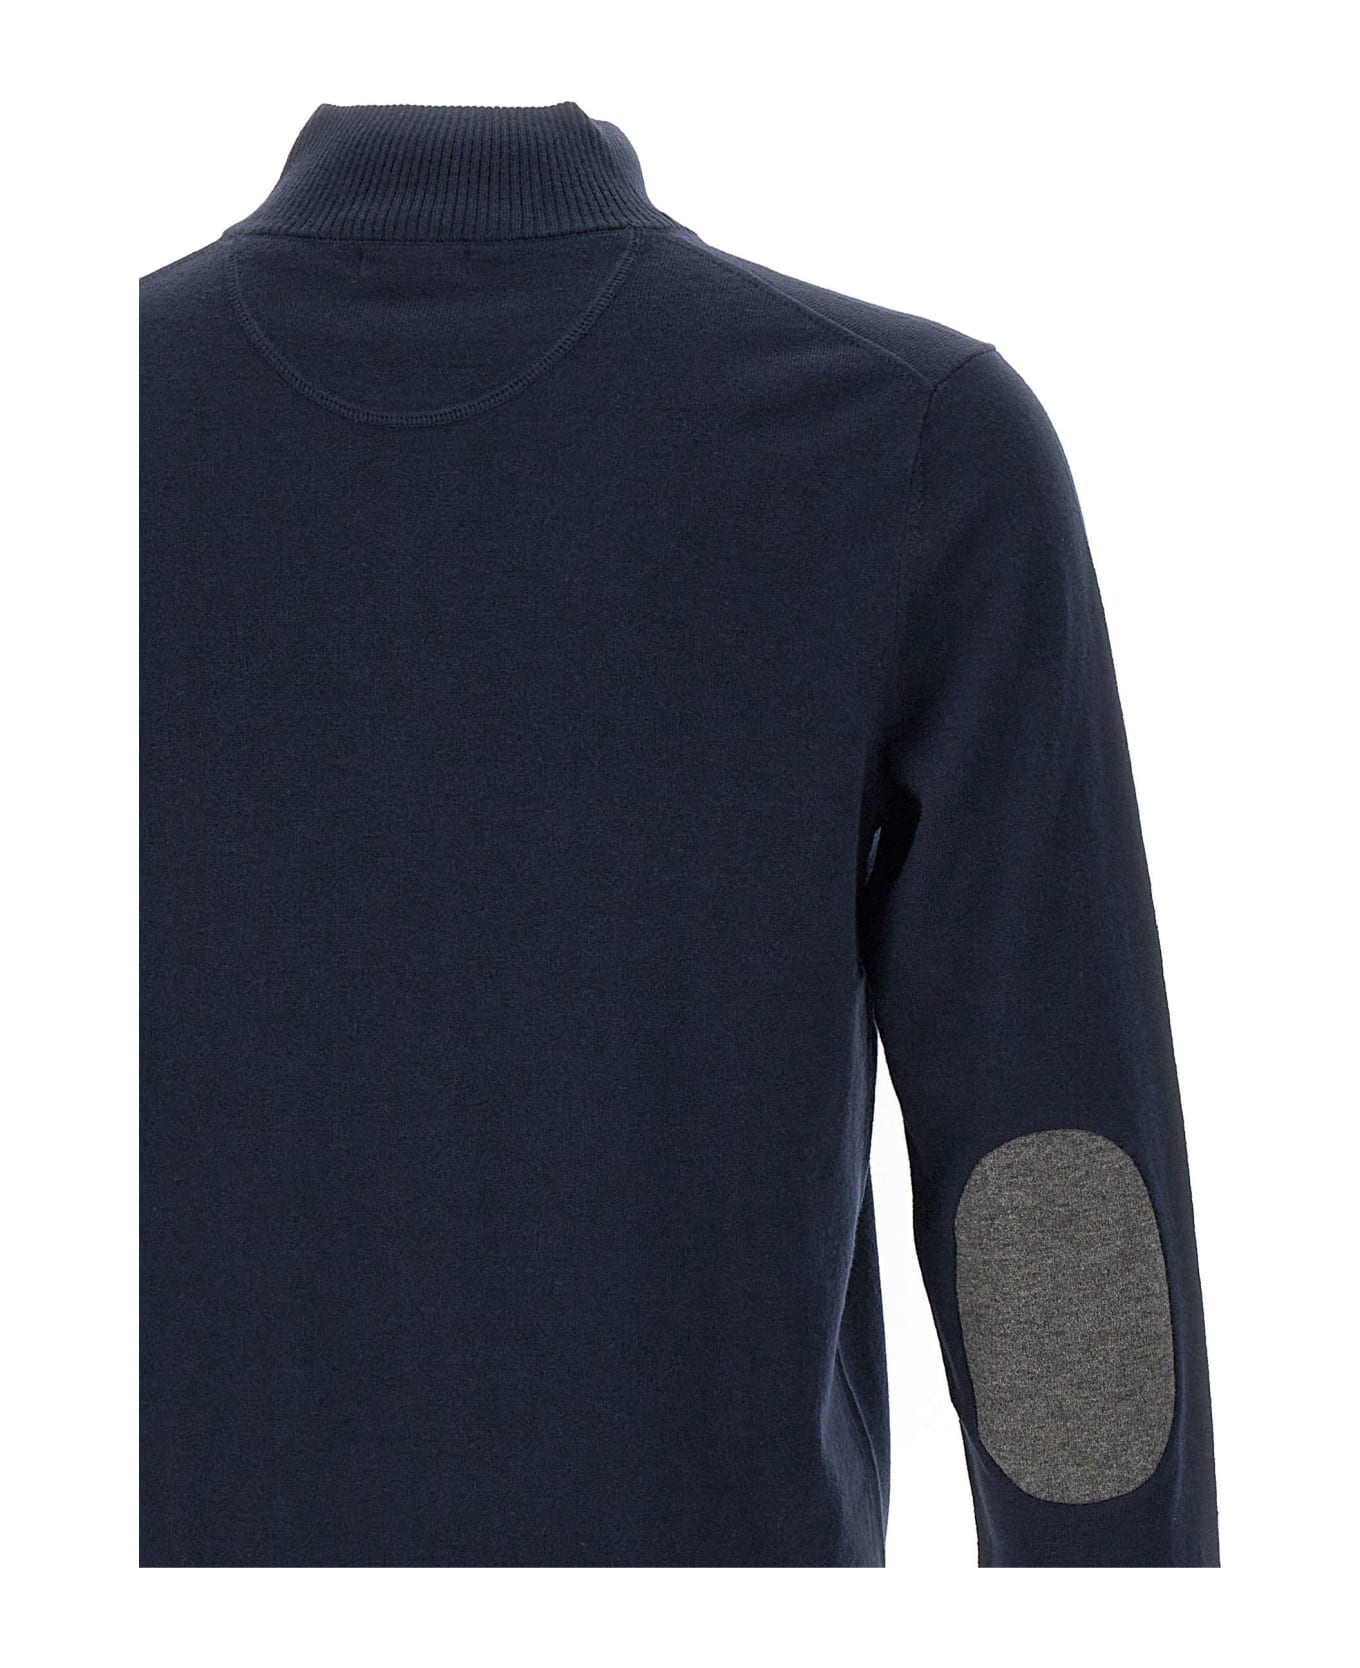 Sun 68 'stripes' Cotton And Wool Sweater Sweater - NAVY BLUE